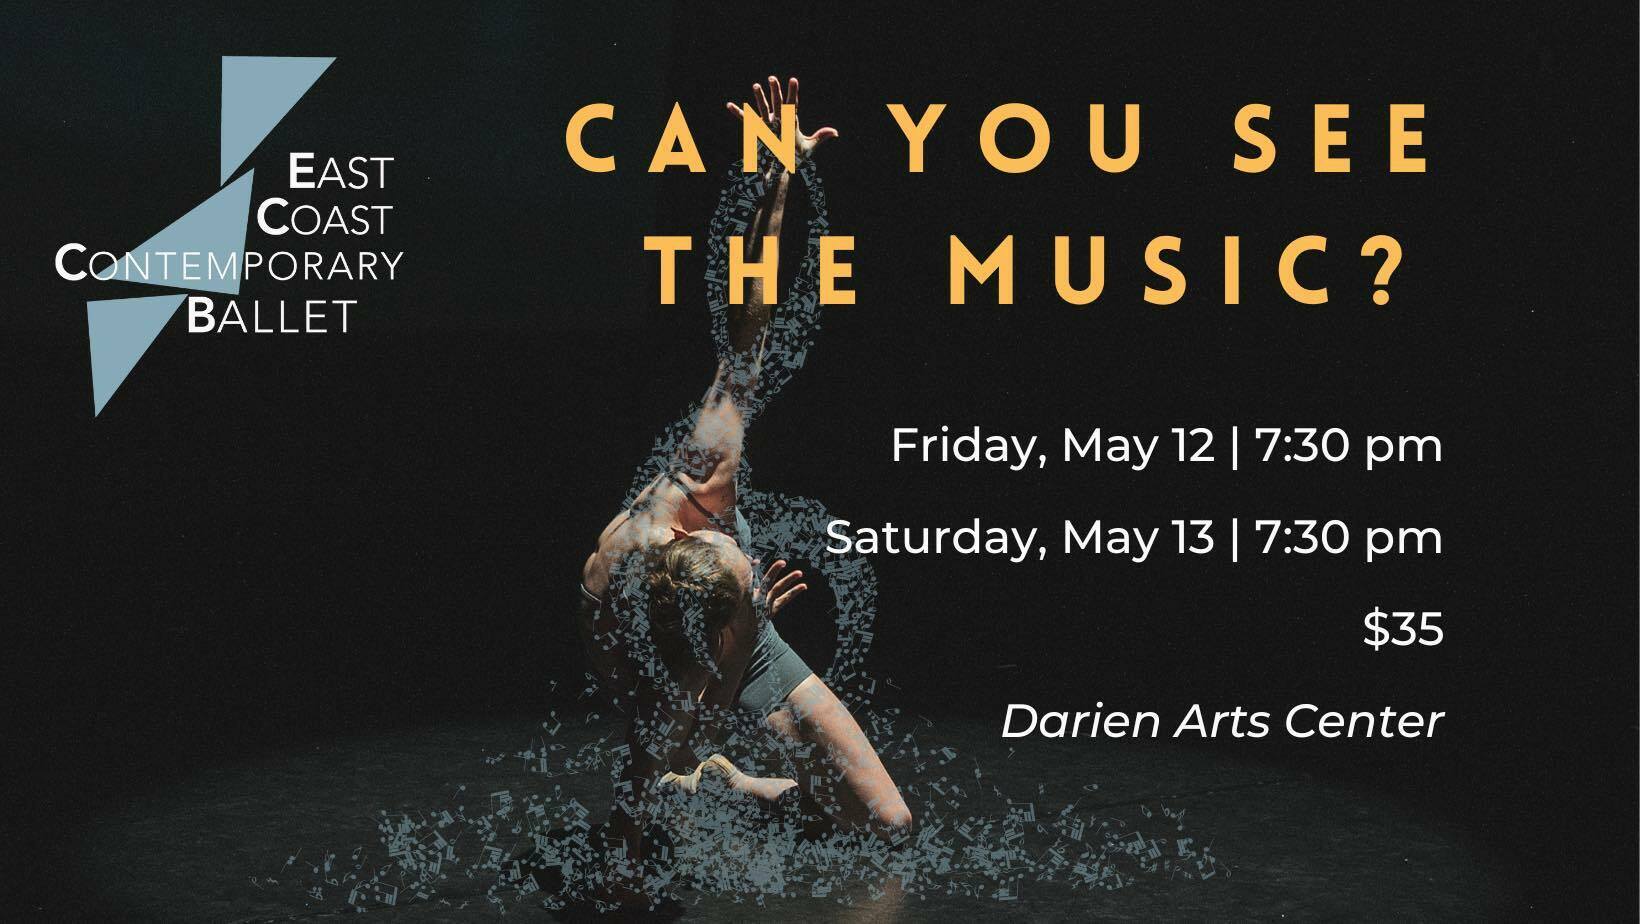 East Coast Contemporary Ballet presents "Can You See the Music?", Darien, Connecticut, United States